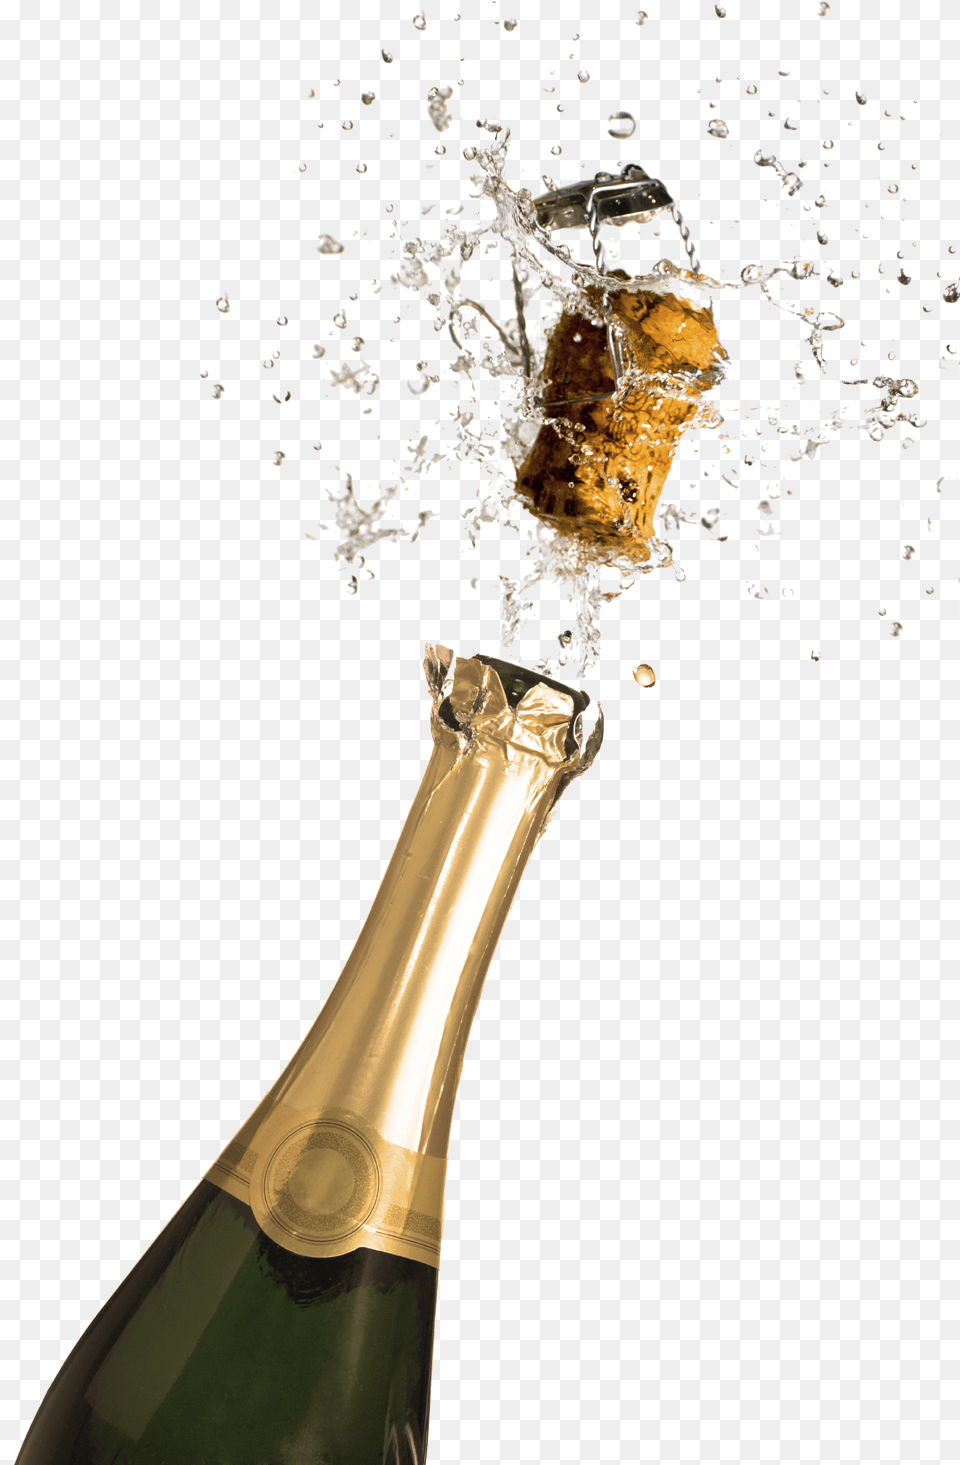 Champagne Free Download Beer Bottle Opened, Alcohol, Wine, Liquor, Wine Bottle Png Image